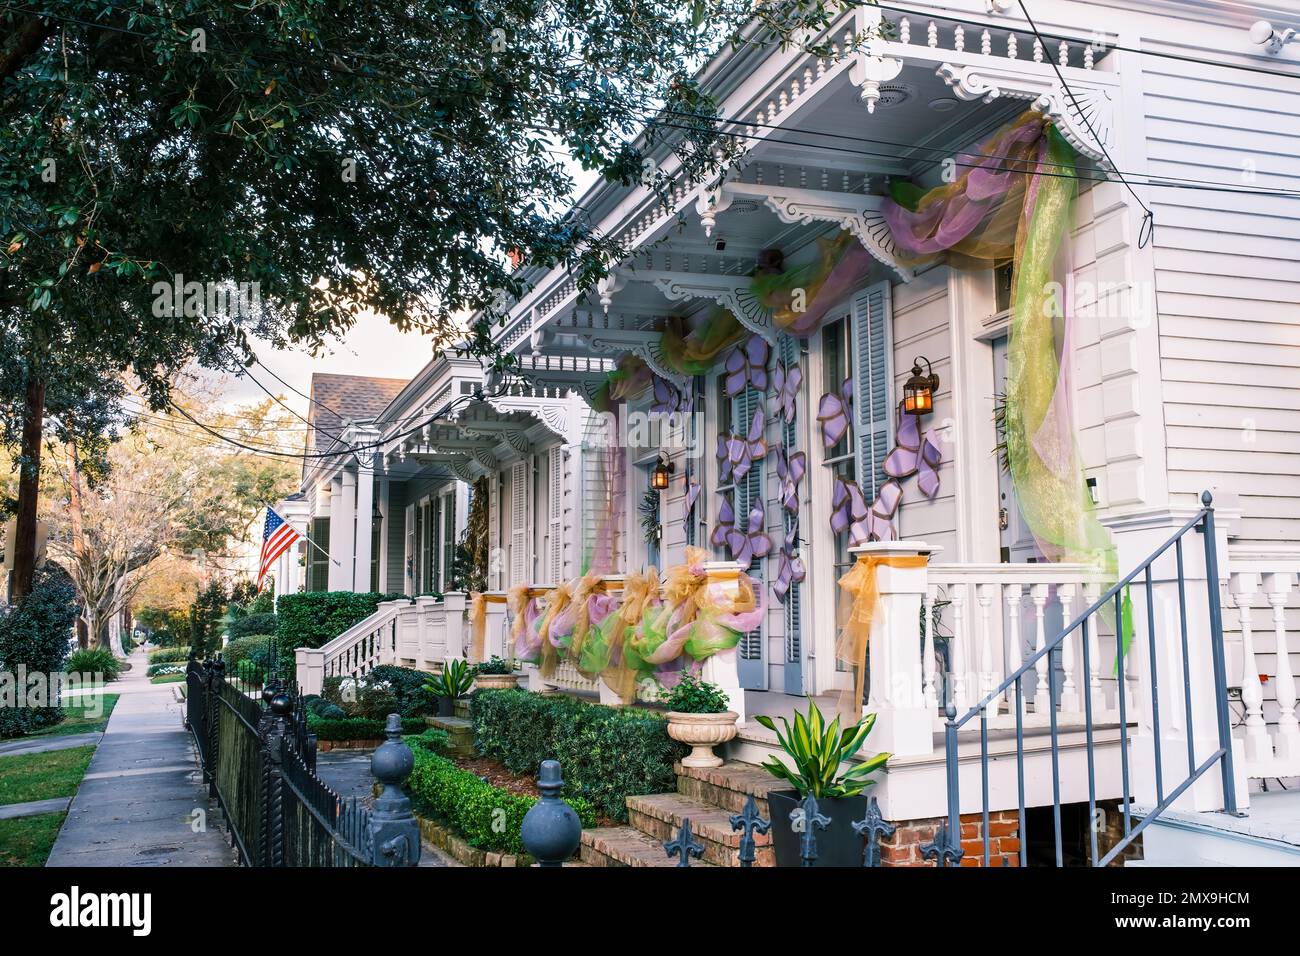 NEW ORLEANS, LA, USA - JANUARY 31, 2023: Row of historic shotgun double houses with Mardi Gras decorations in Uptown Neighborhood Stock Photo